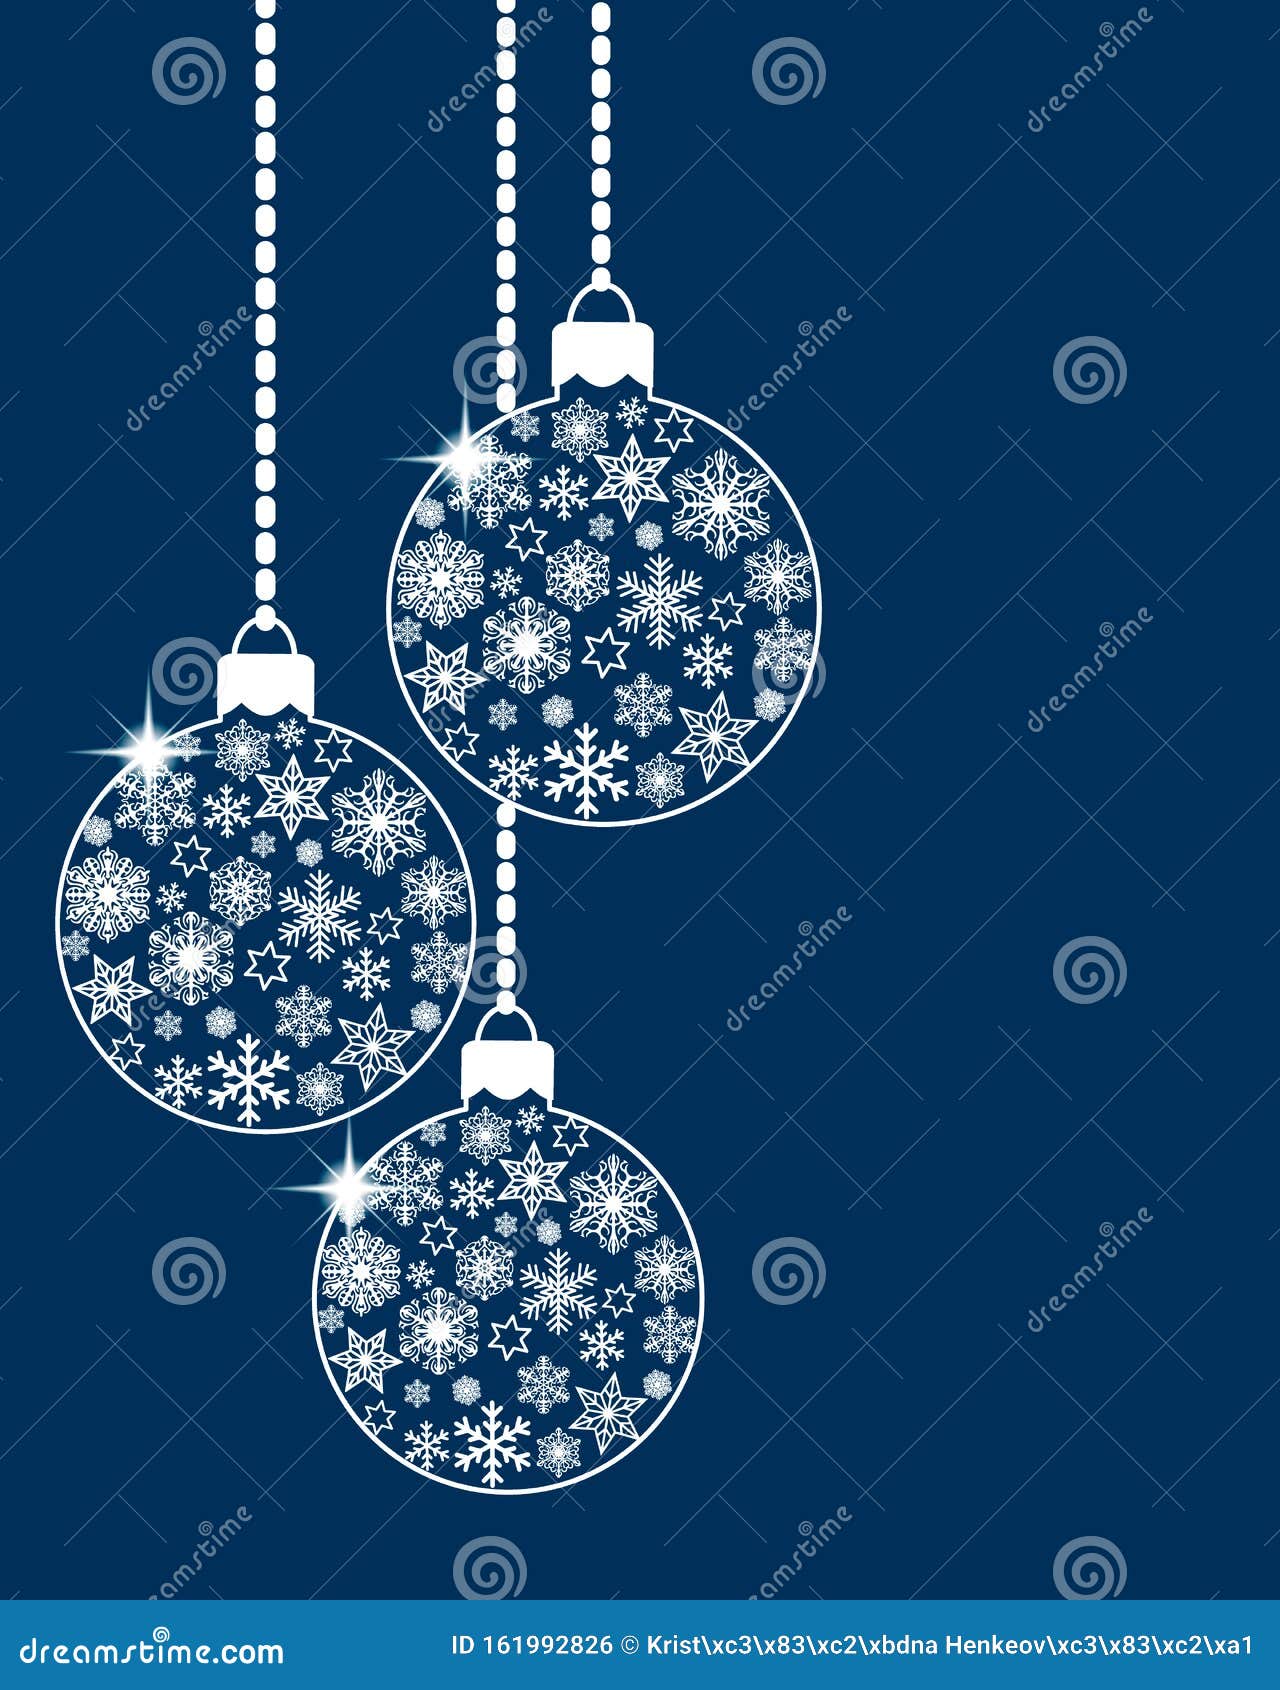 hanging christmas ball baubles decorated with various white snowflakes and stars on blue background. flat retro style. 